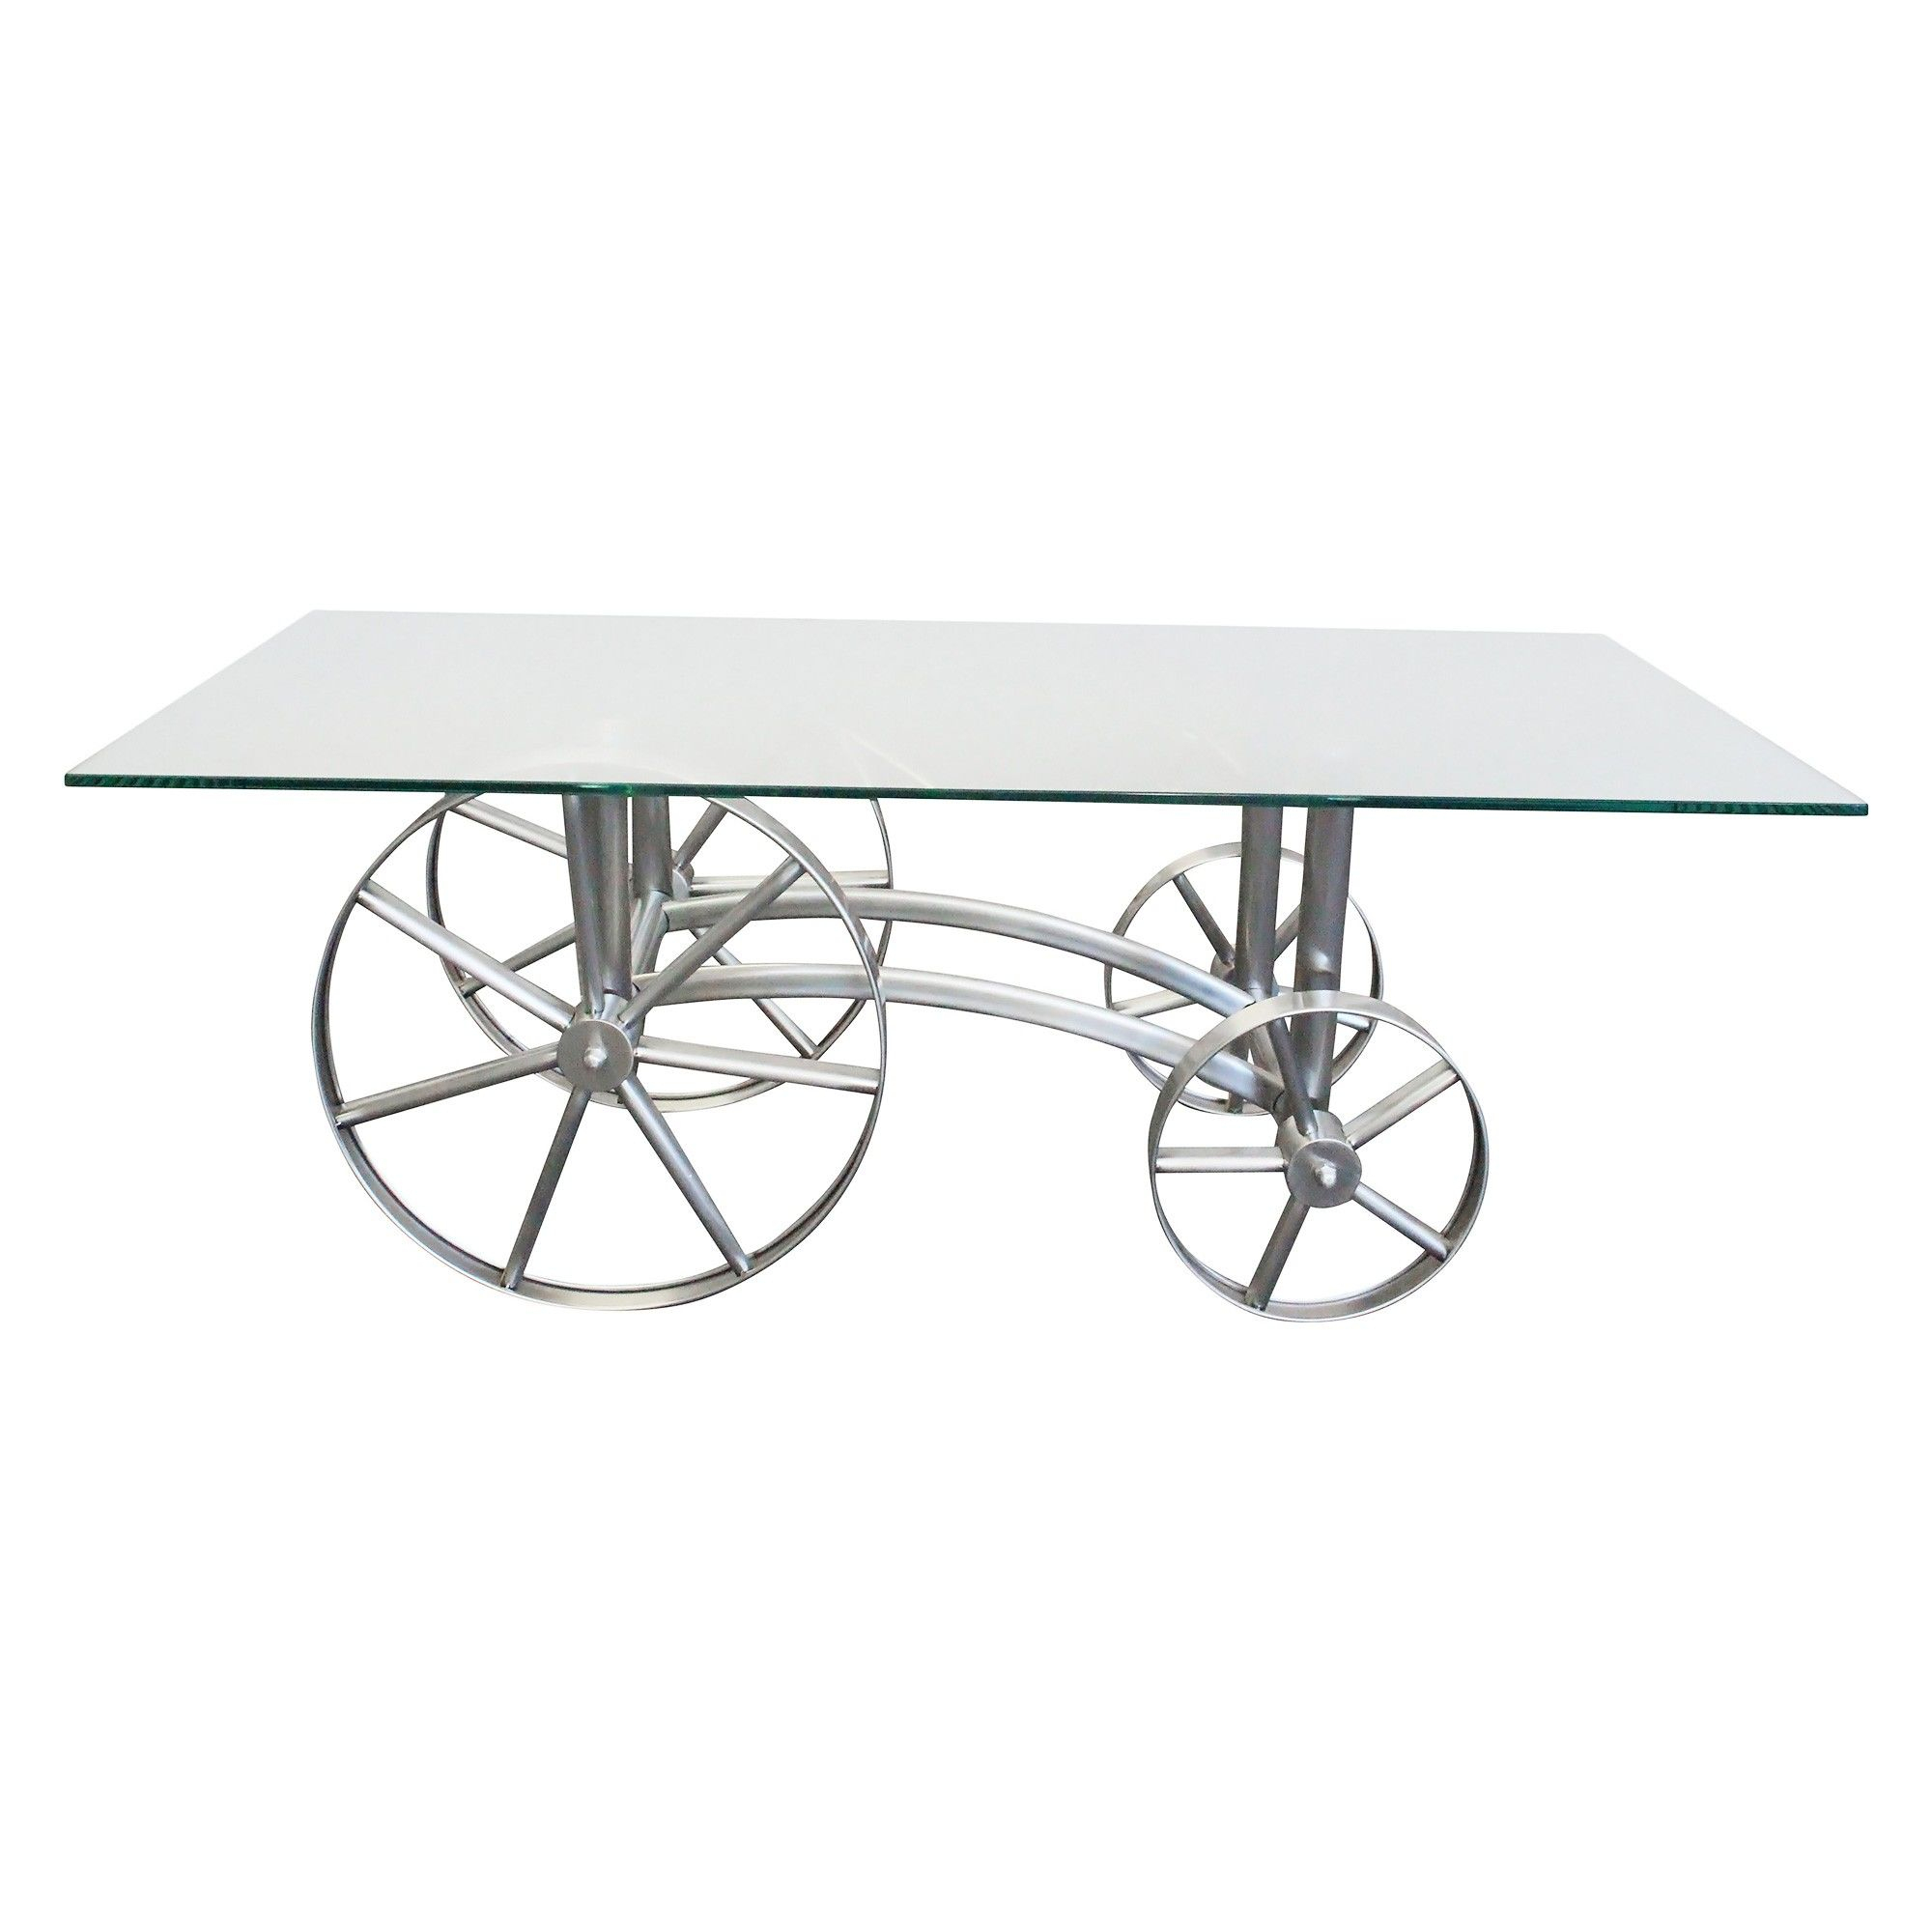 Odyssey Glass Top Stainless Steel Coffee Table, 130Cm, Nickel destiné Table Naterial Odyssea